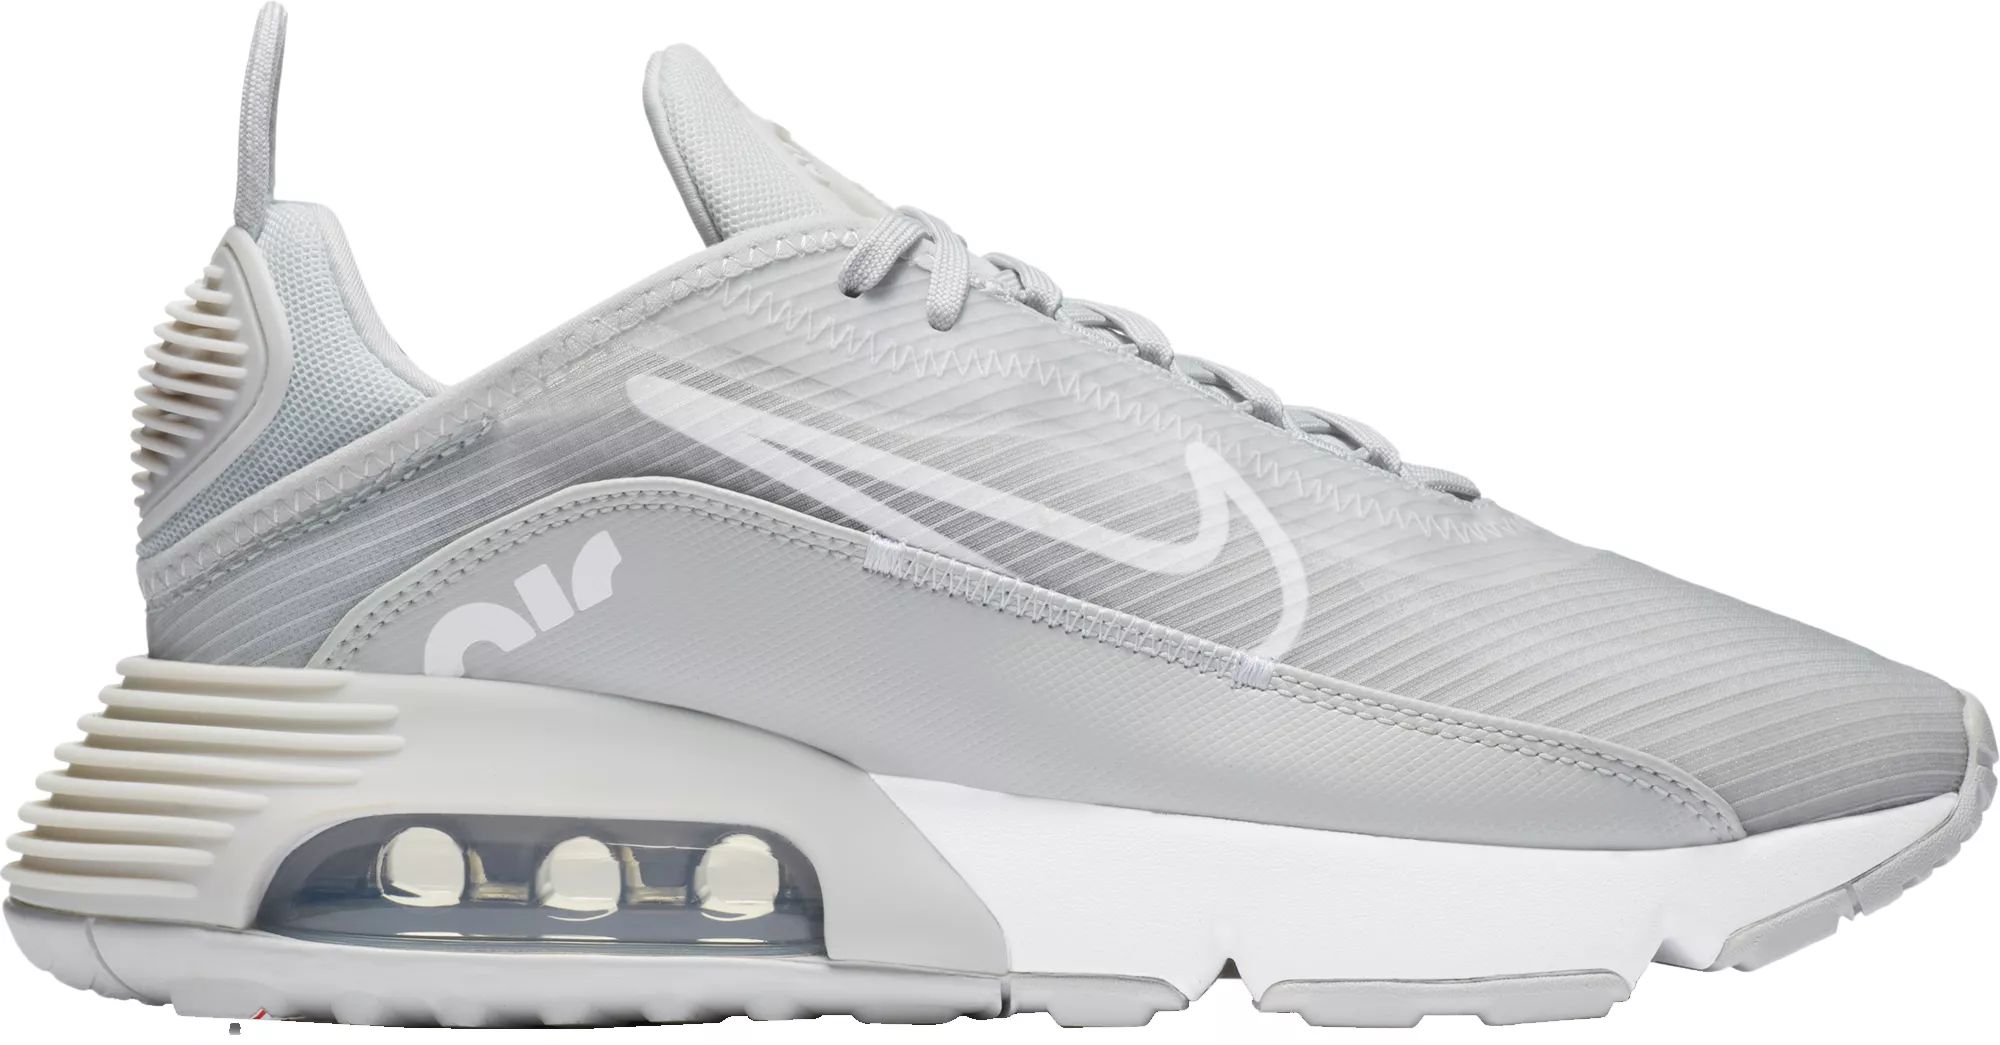 Nike Women's Air Max 2090 Shoes | Dick's Sporting Goods